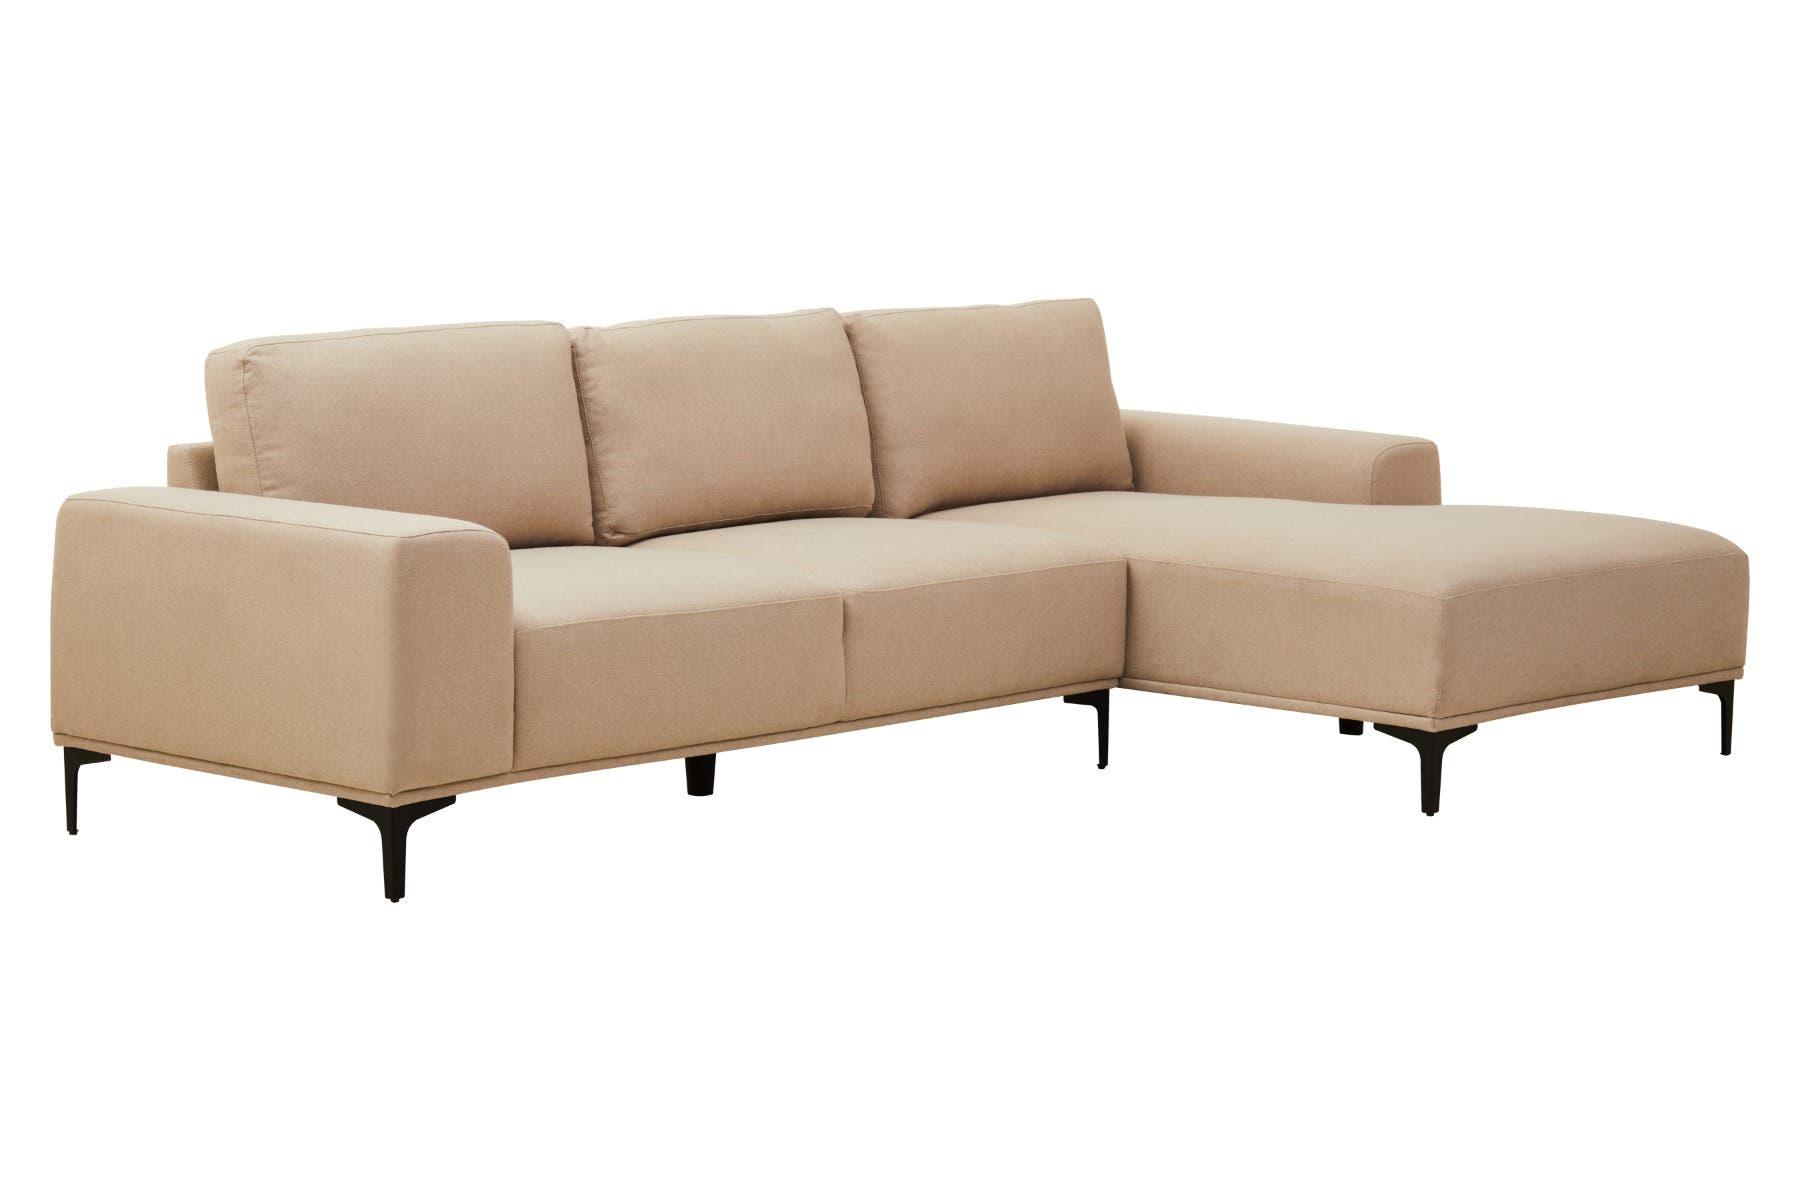 Toulon 3 Seat Natural Fabric Left Chaise Sofa